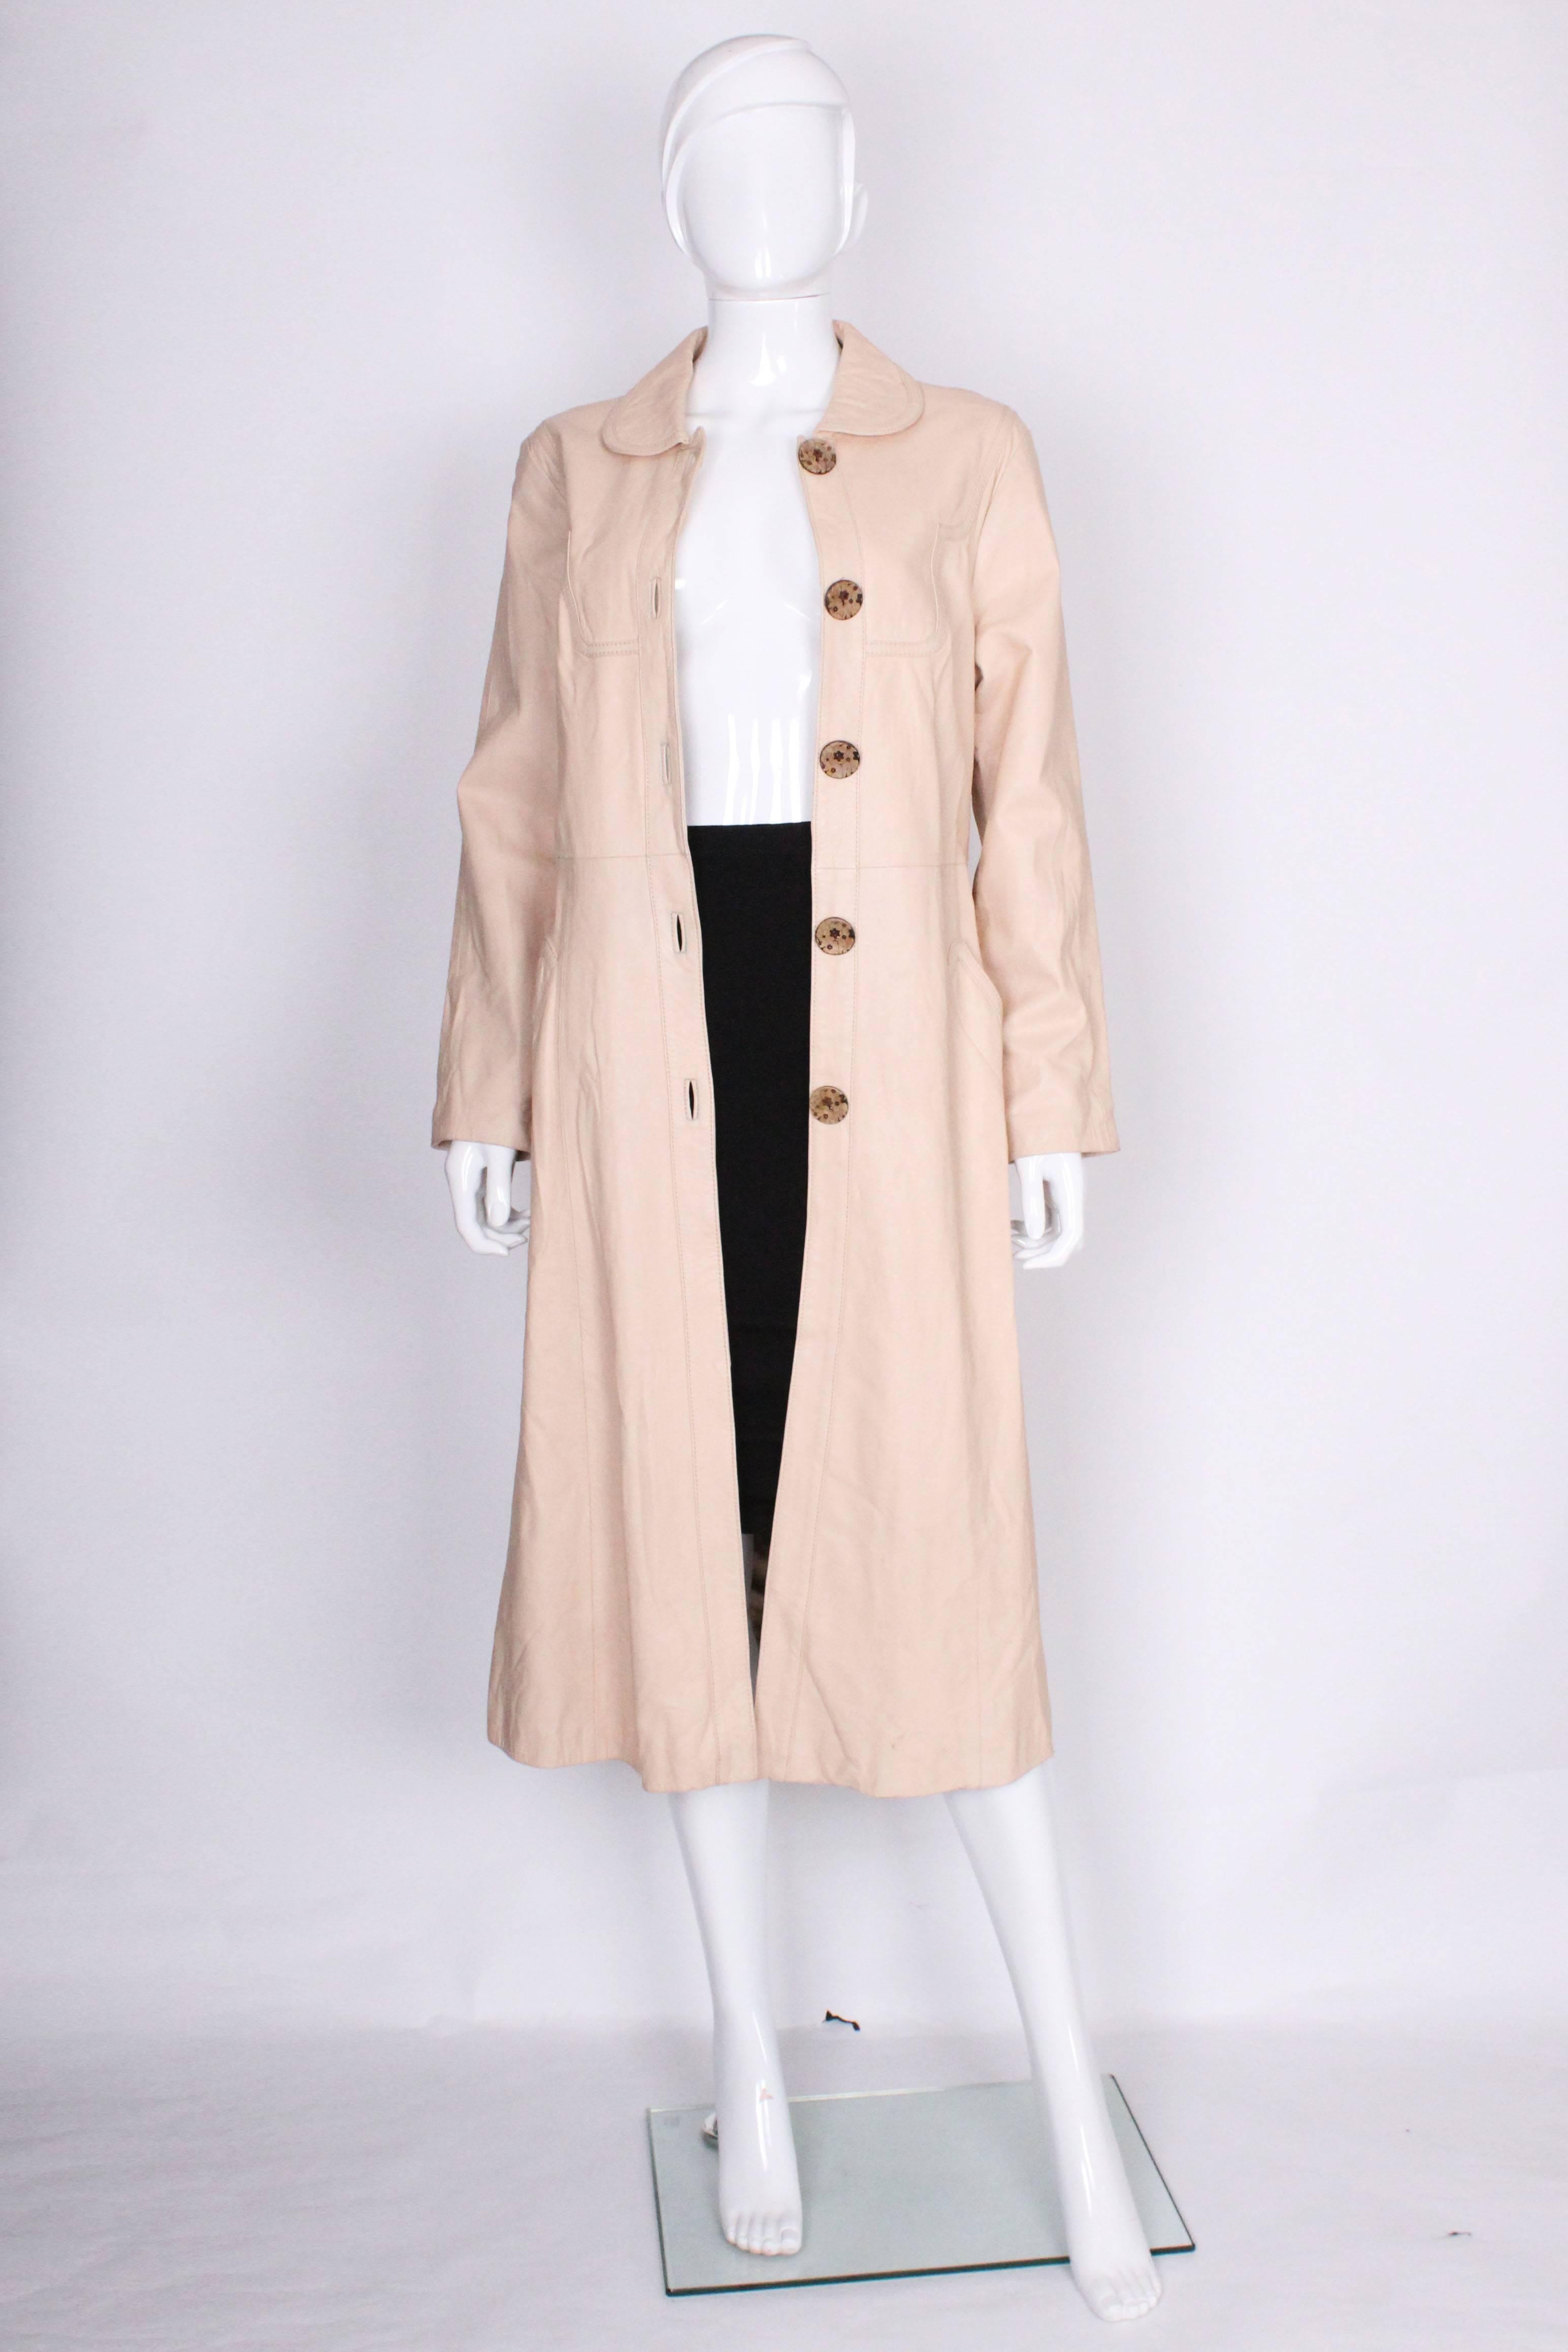 A super chic leather coat by Pierre Cardin , Paris. In a pale bisucit colour and super soft leather , this coat is a great addition to an Autumn wardobe. It has a round collar,double stitch detail on the yoke , 5 button opening and a leather belt